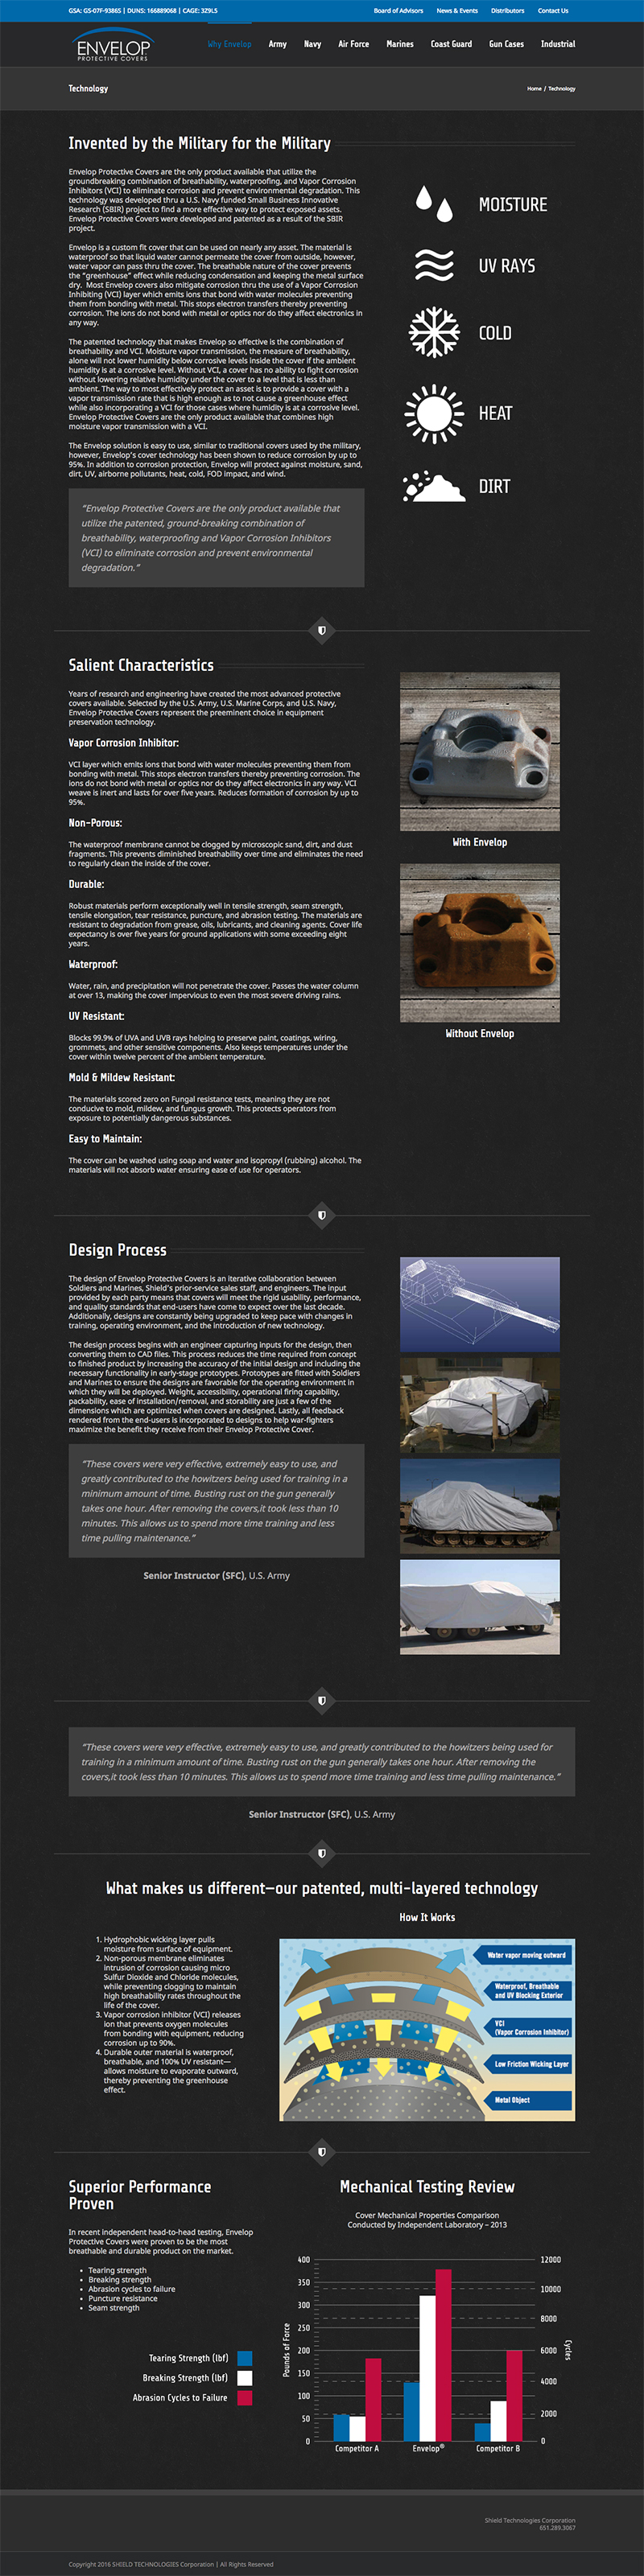 An webpage built to show the technology and design process behind protective military covers